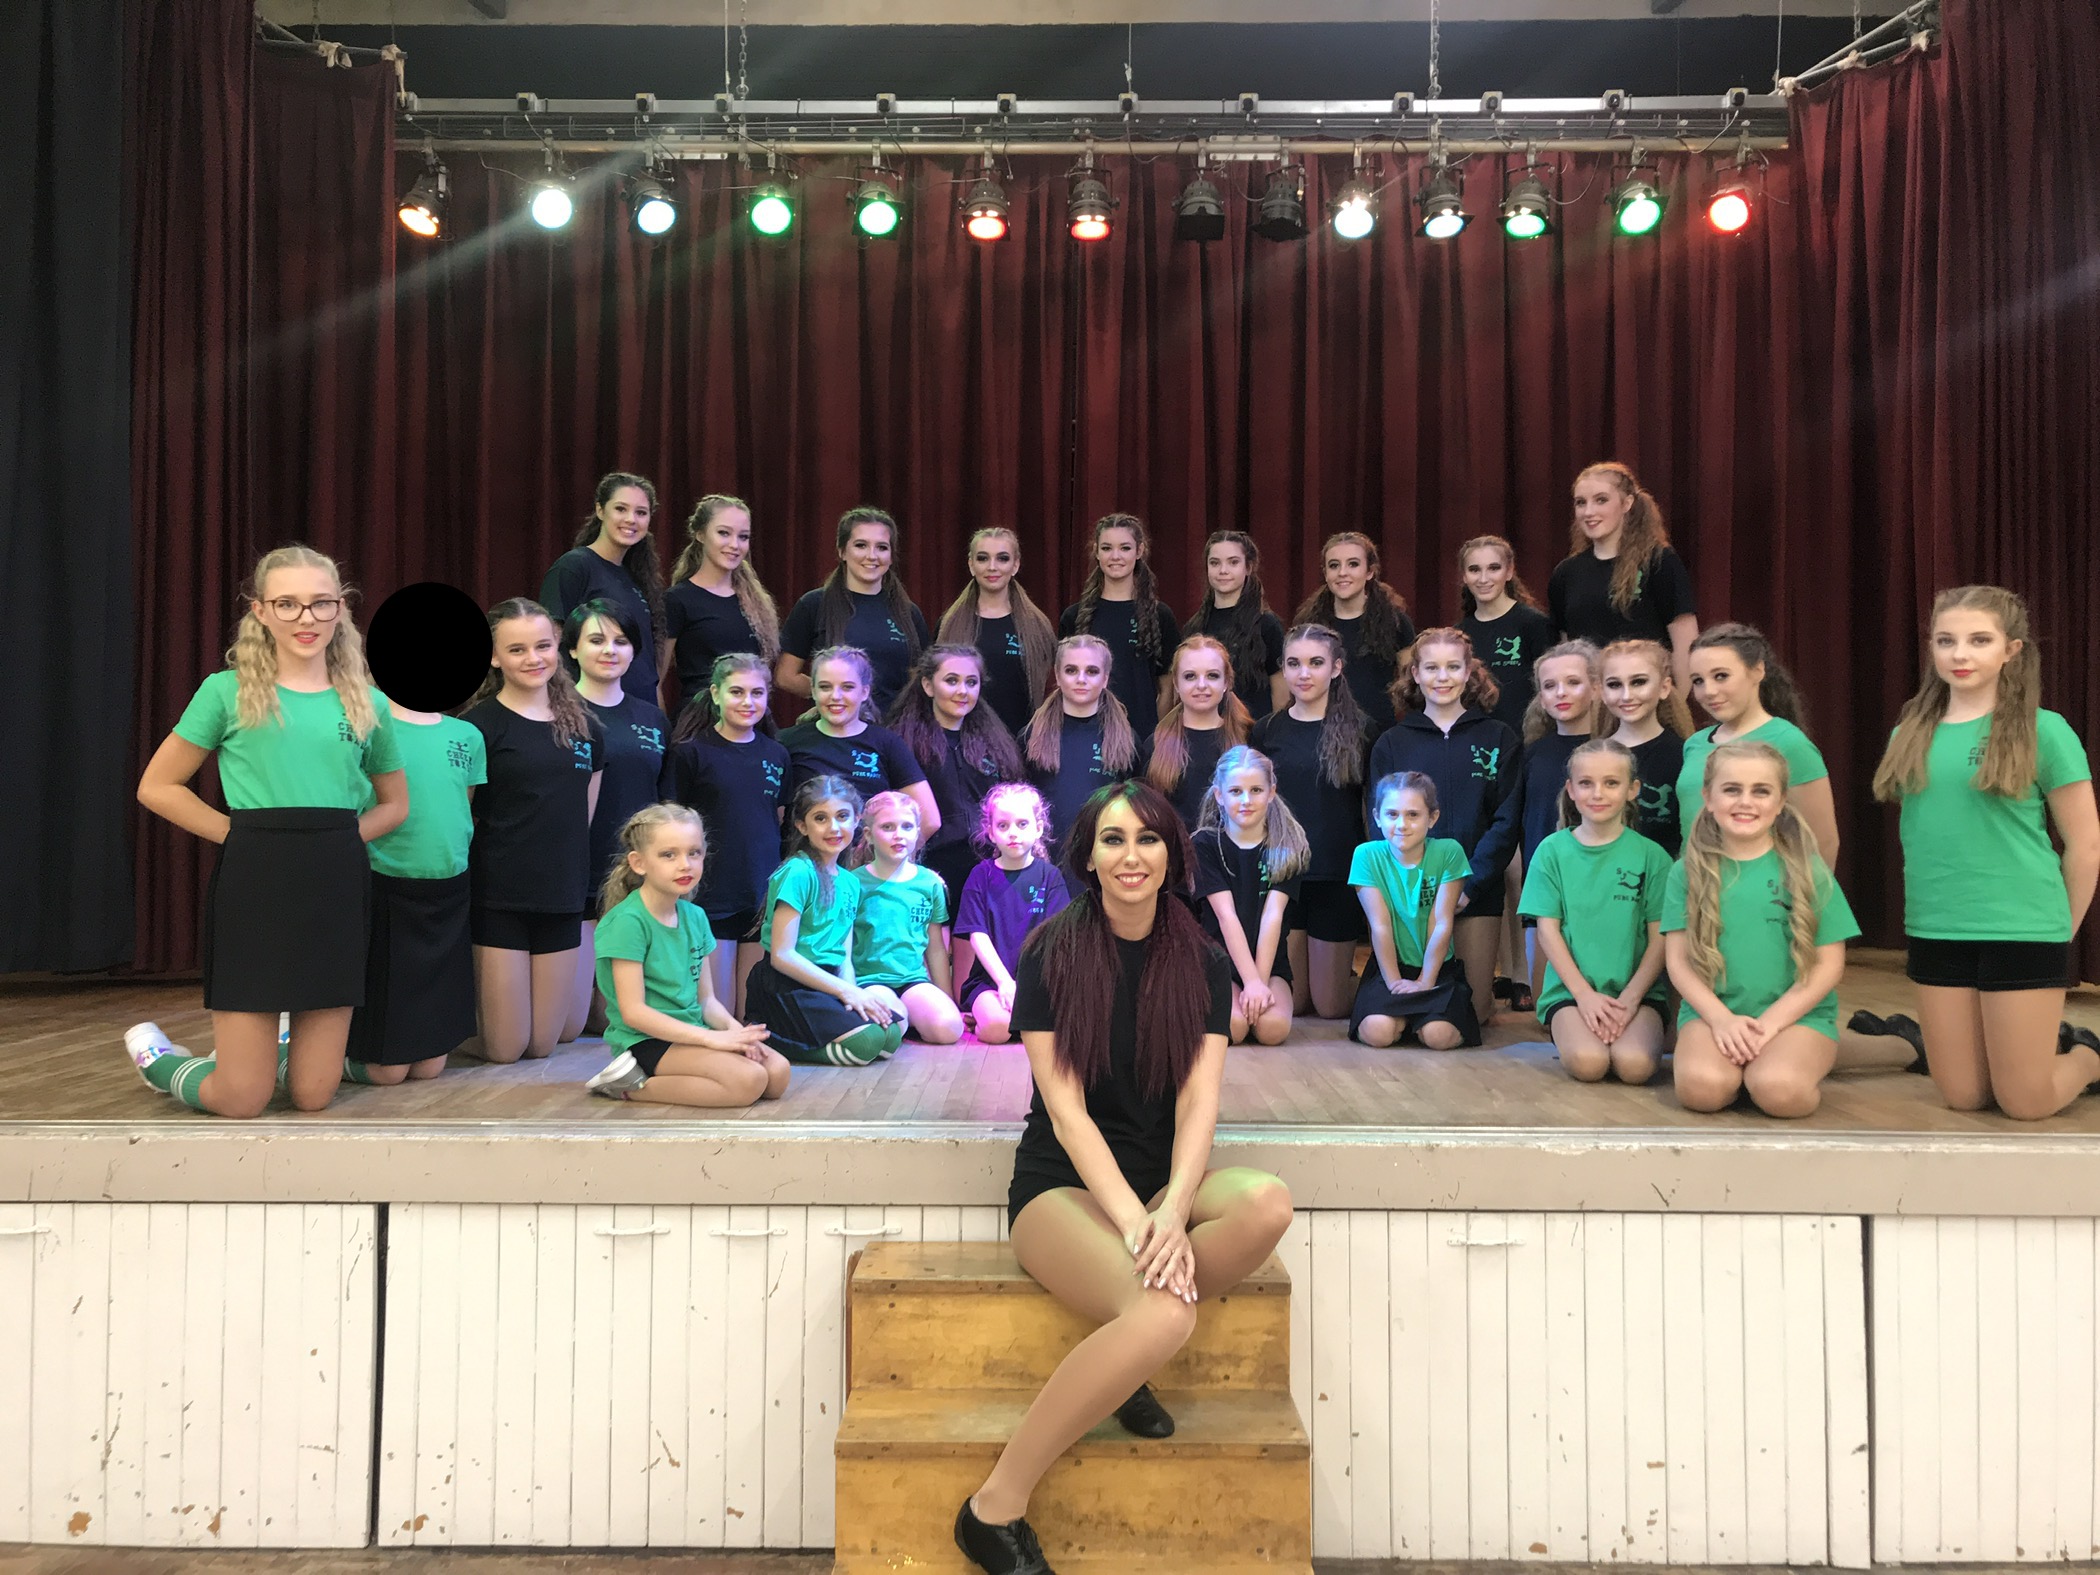 Is your child a budding dancer? Classes at Grangeway